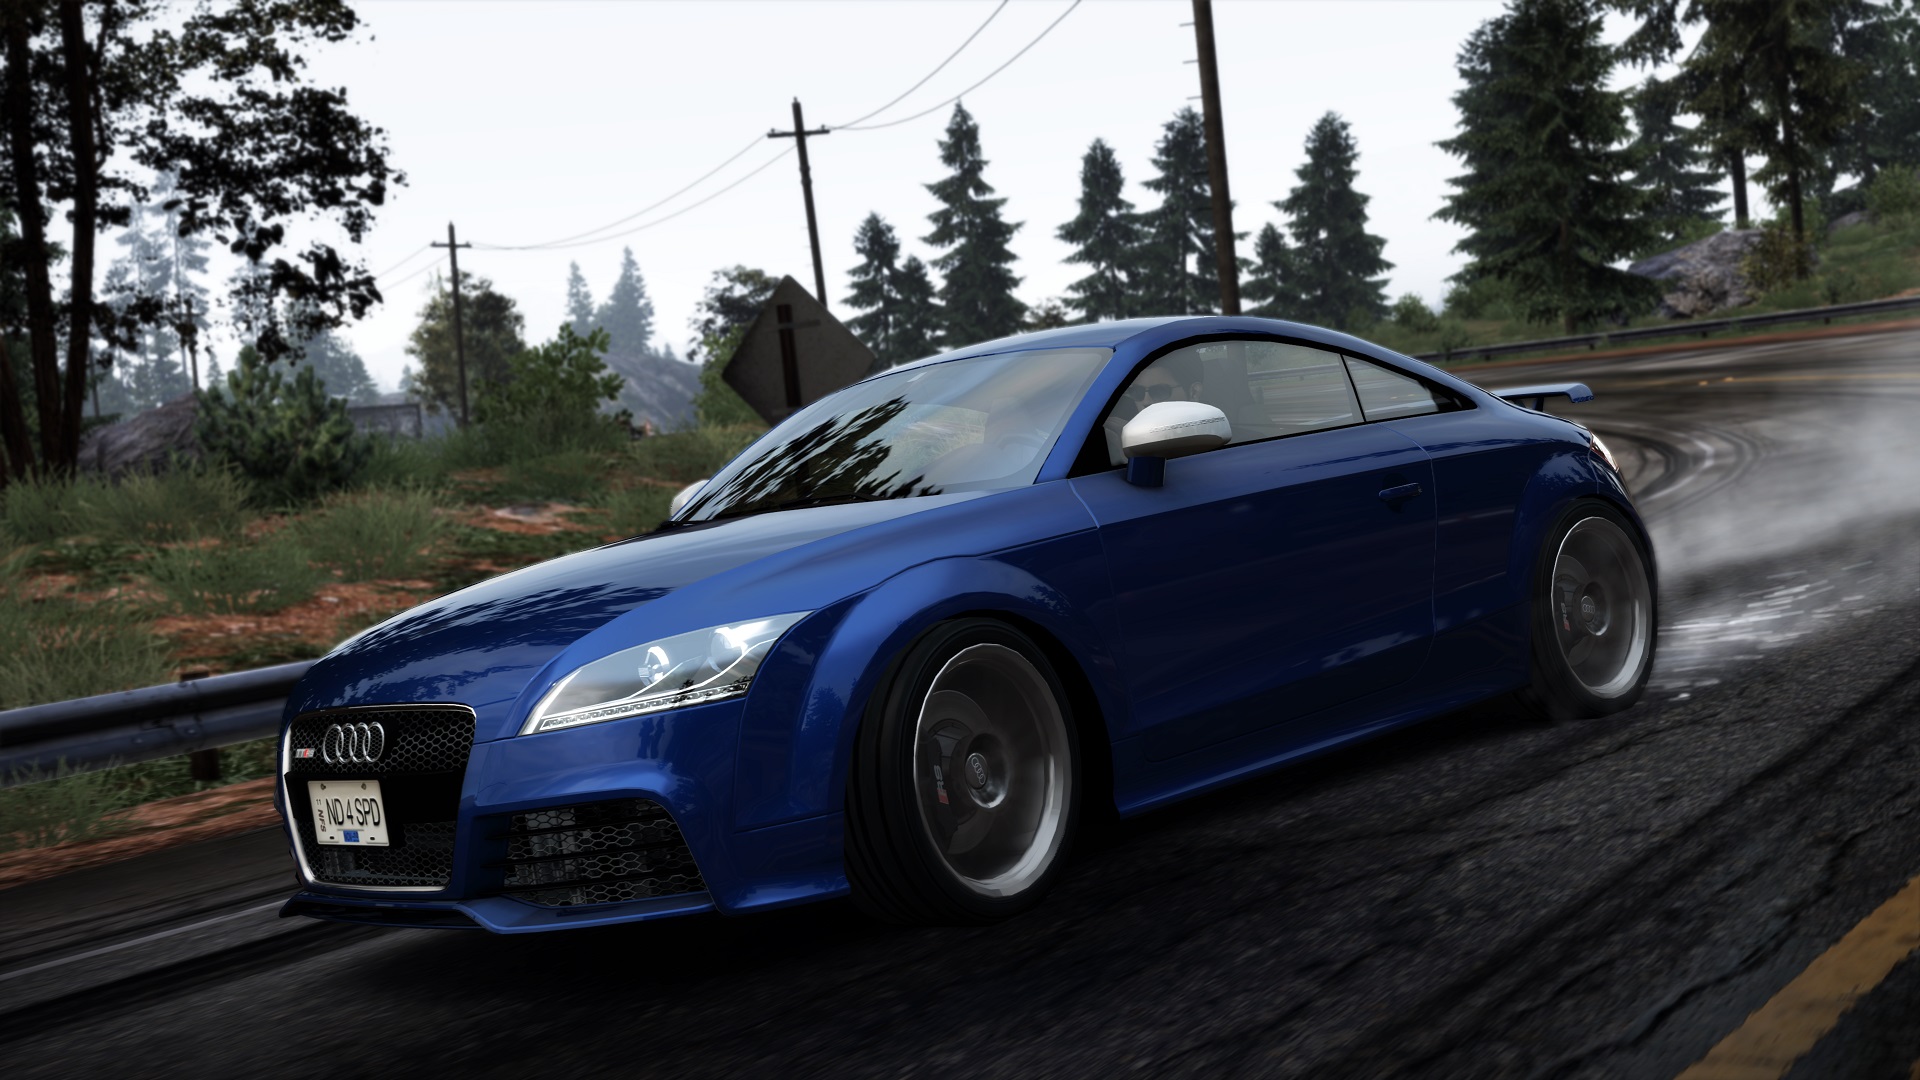 Audi TT RS, Need for Speed Wiki